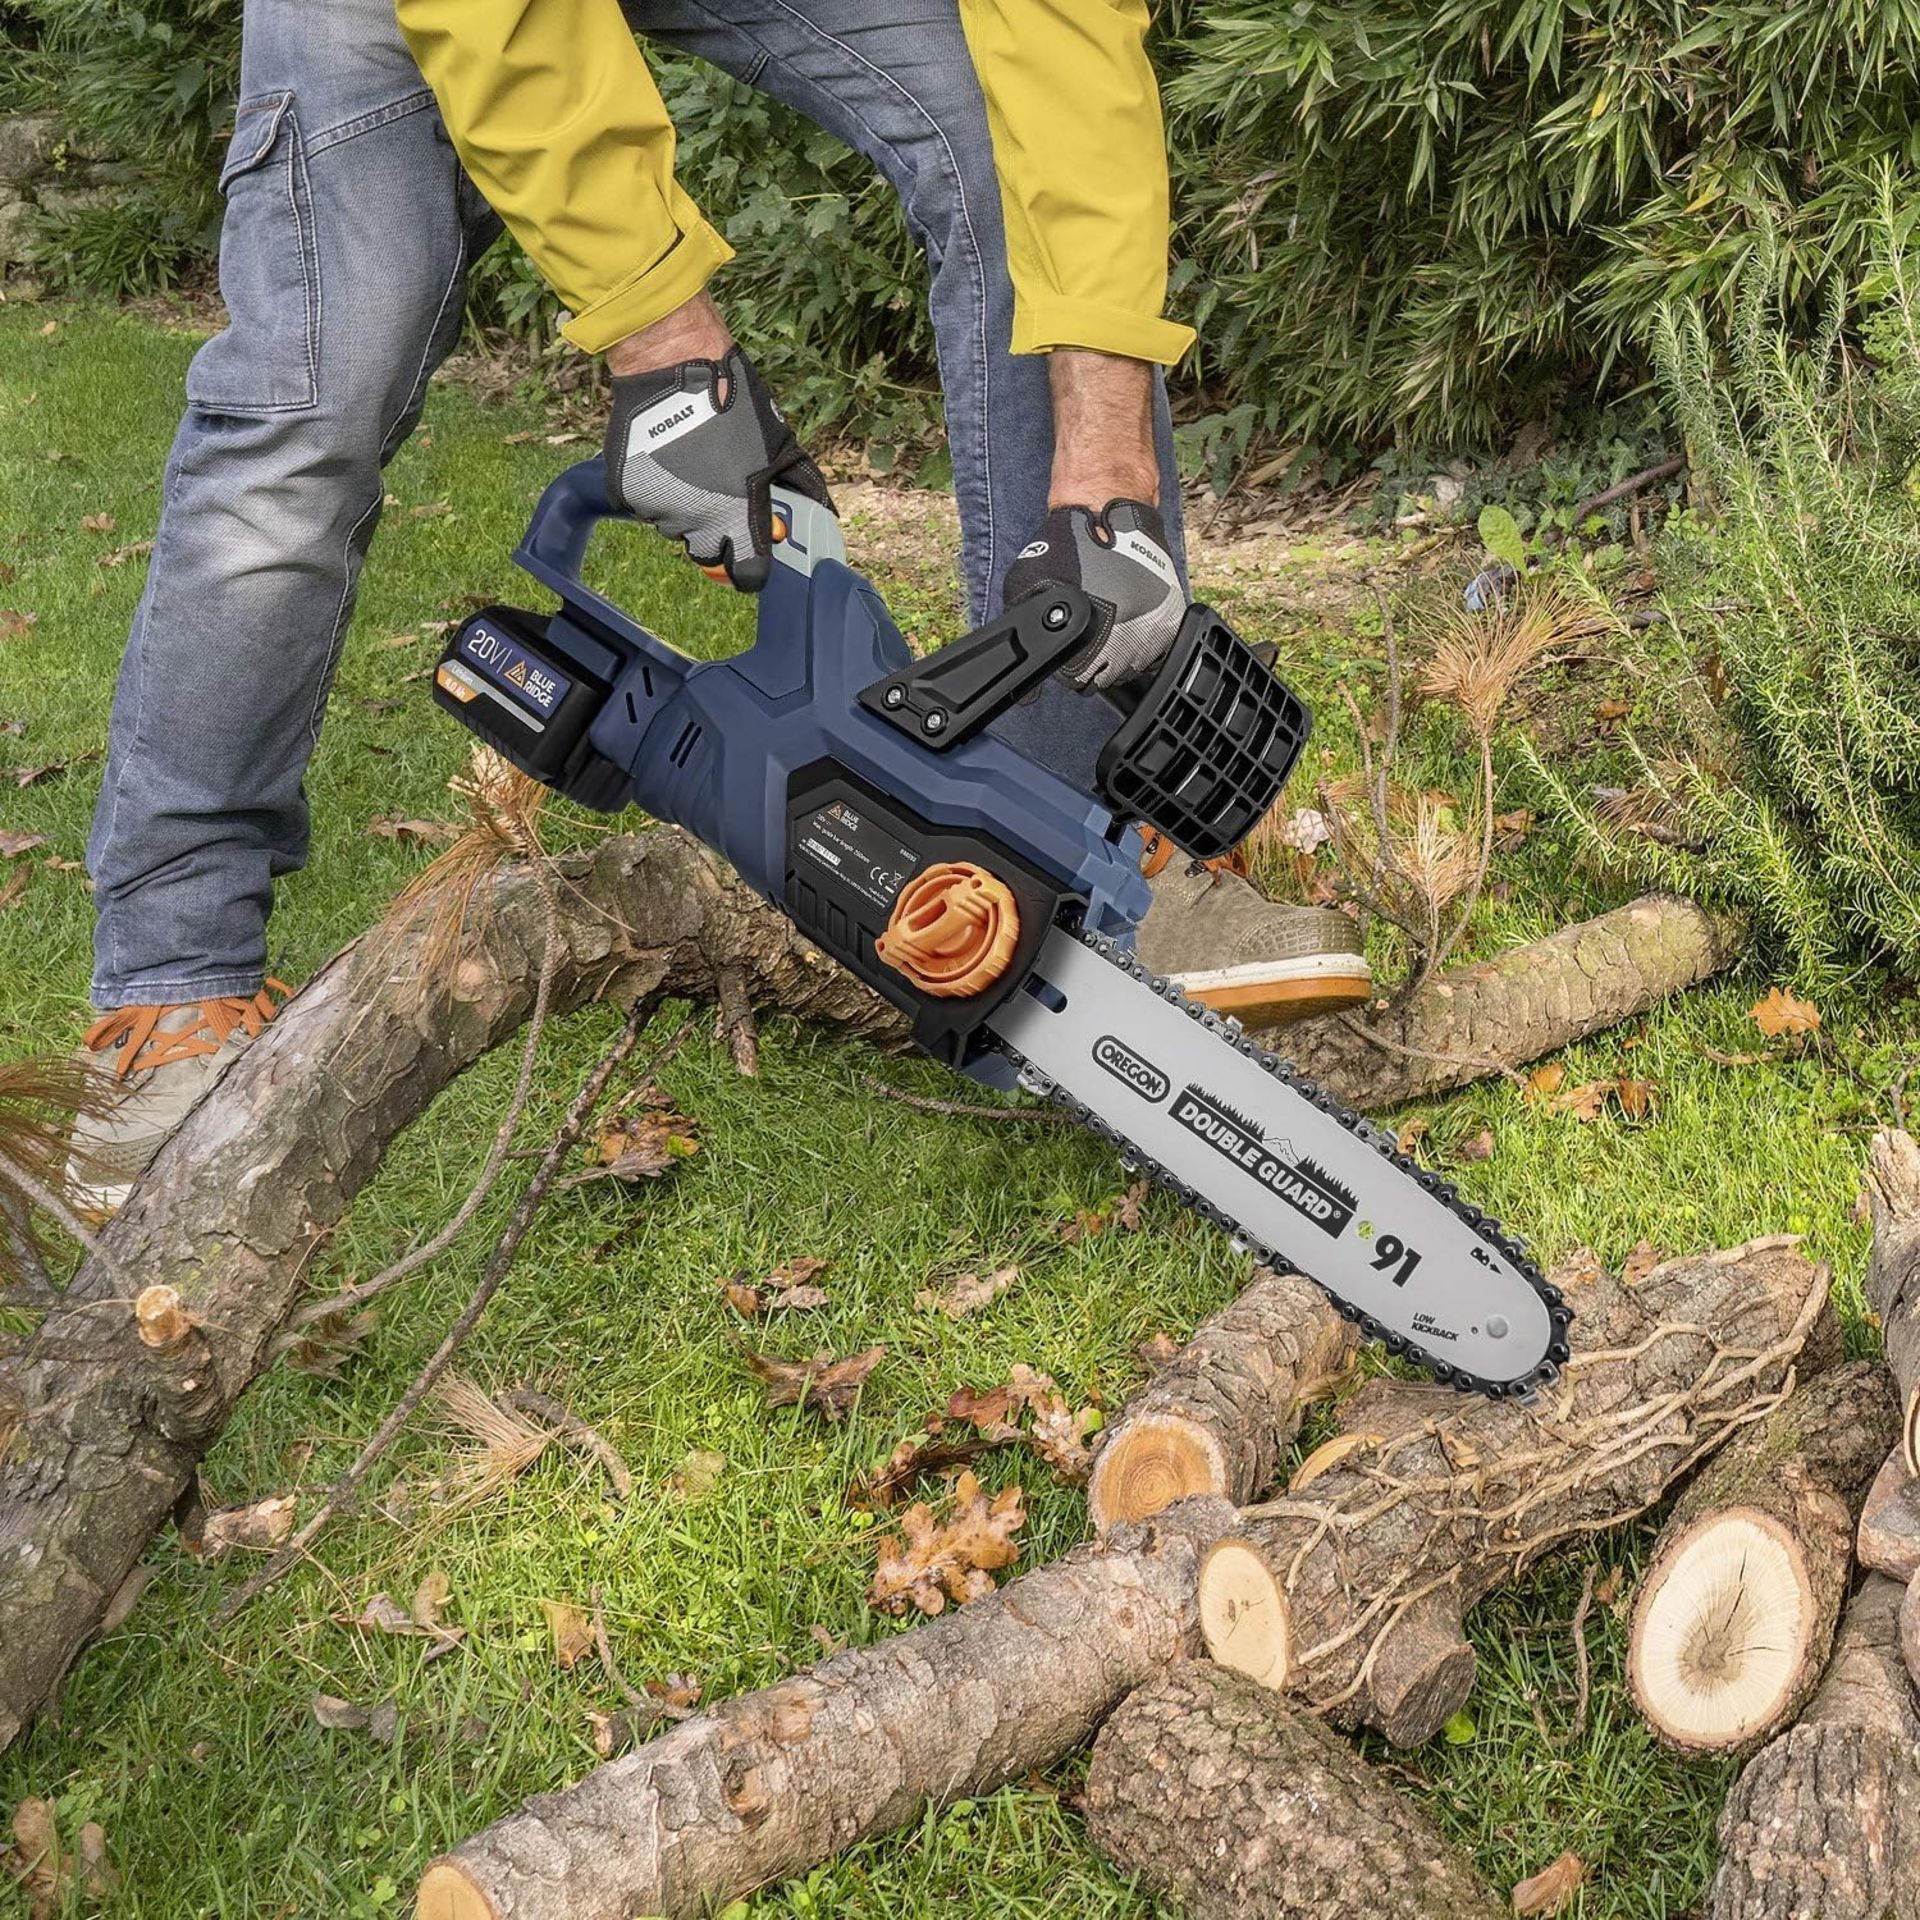 4x NEW & BOXED BLUE RIDGE 25CM 18V Chainsaw with 4.0 Ah Li-ion Battery. RRP £86.99 EACH. Equipped - Image 4 of 4